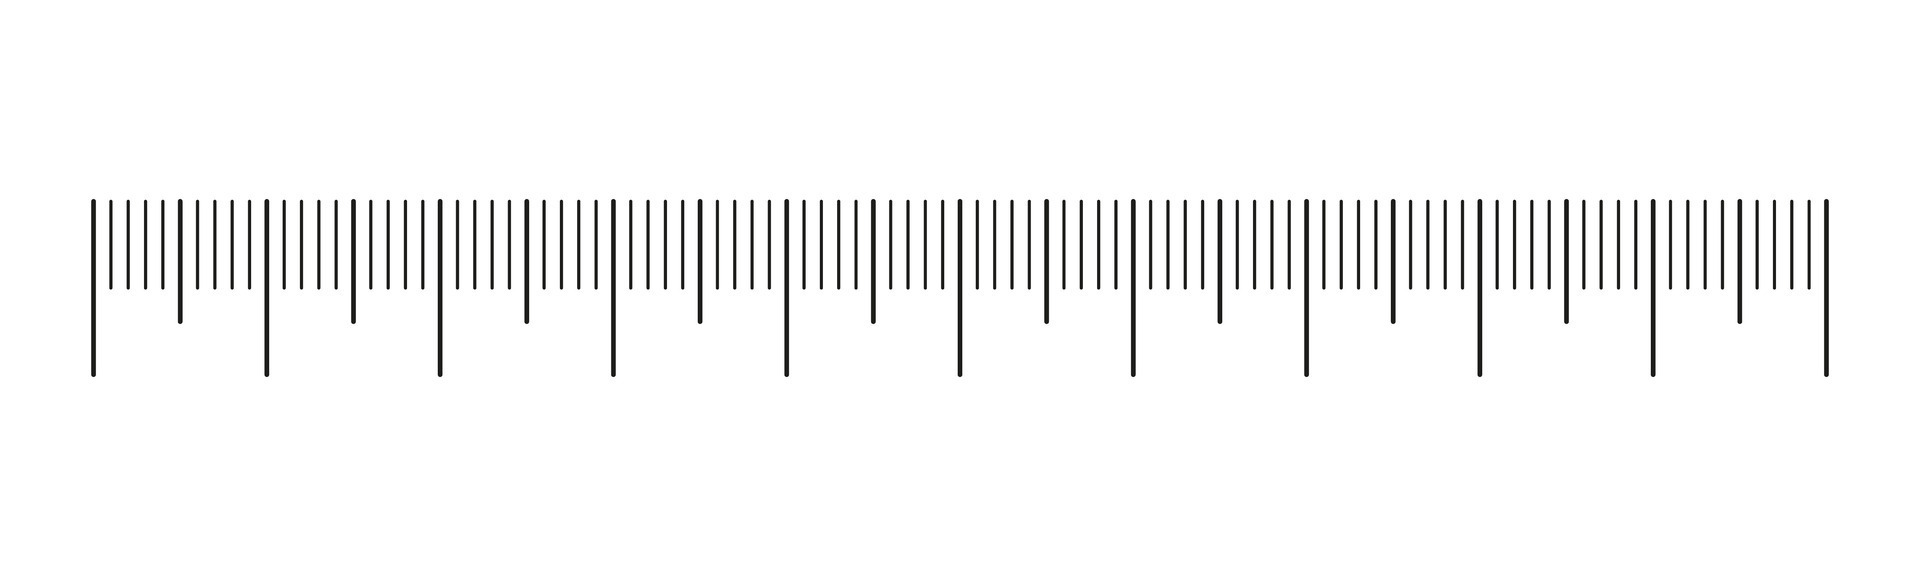 https://static.vecteezy.com/system/resources/previews/028/633/009/original/measuring-chart-with-10-centimeters-ruler-scale-with-numbers-length-measurement-math-distance-height-sewing-tool-illustration-eps-icon-vector.jpg